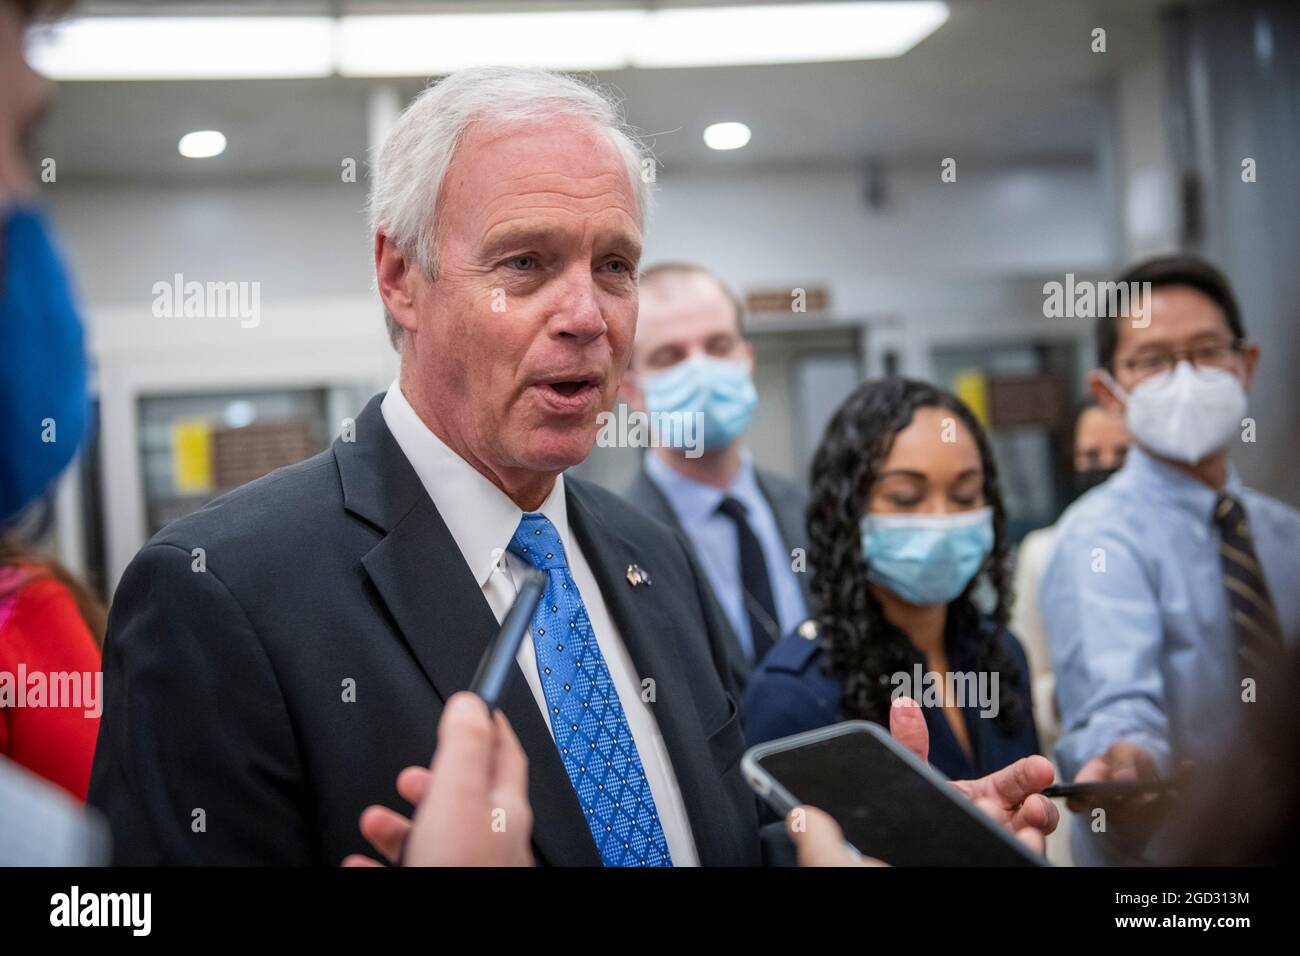 United States Senator Ron Johnson (Republican of Wisconsin) talks with reporters as he walks through the Senate subway during a vote at the US Capitol in Washington, DC, Tuesday, August 10, 2021. The Senate is expected to vote today on final passage of the bipartisan $1 trillion H.R. 3684, Infrastructure Investment and Jobs Act. the Credit: Rod Lamkey/CNP Stock Photo